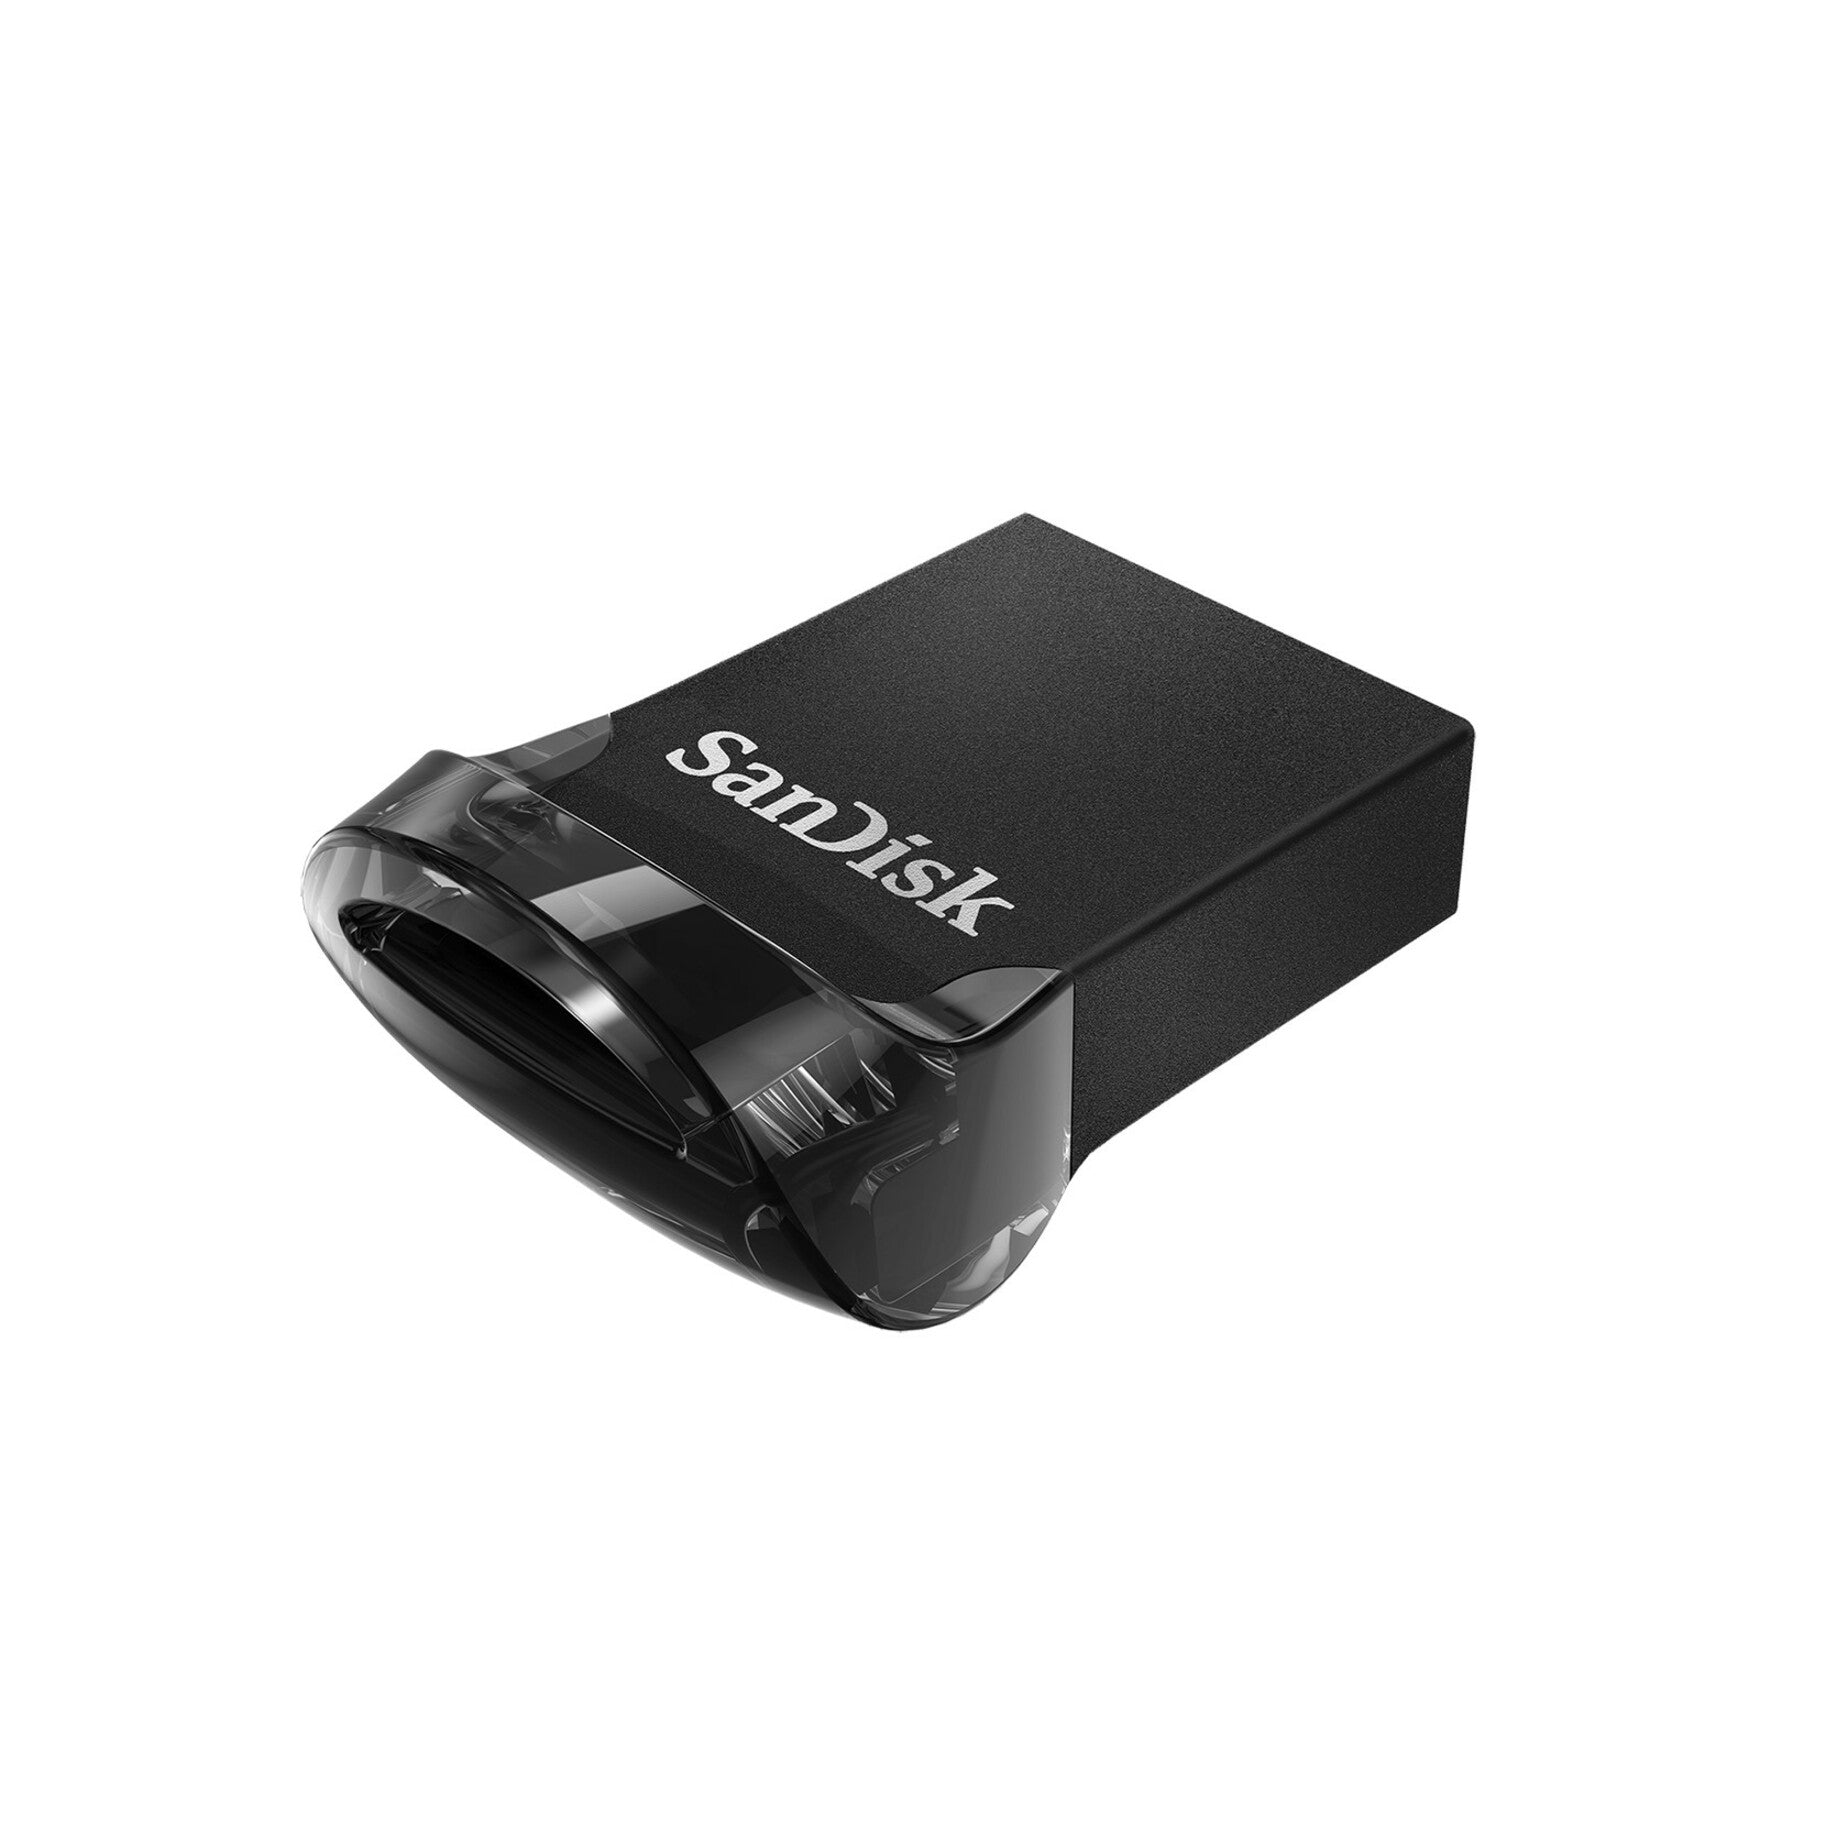 SanDisk SDCZ430-032G-A46 Ultra Fit USB 3.1 Flash Drive 32GB High-Speed Data Transfer and Compact Design